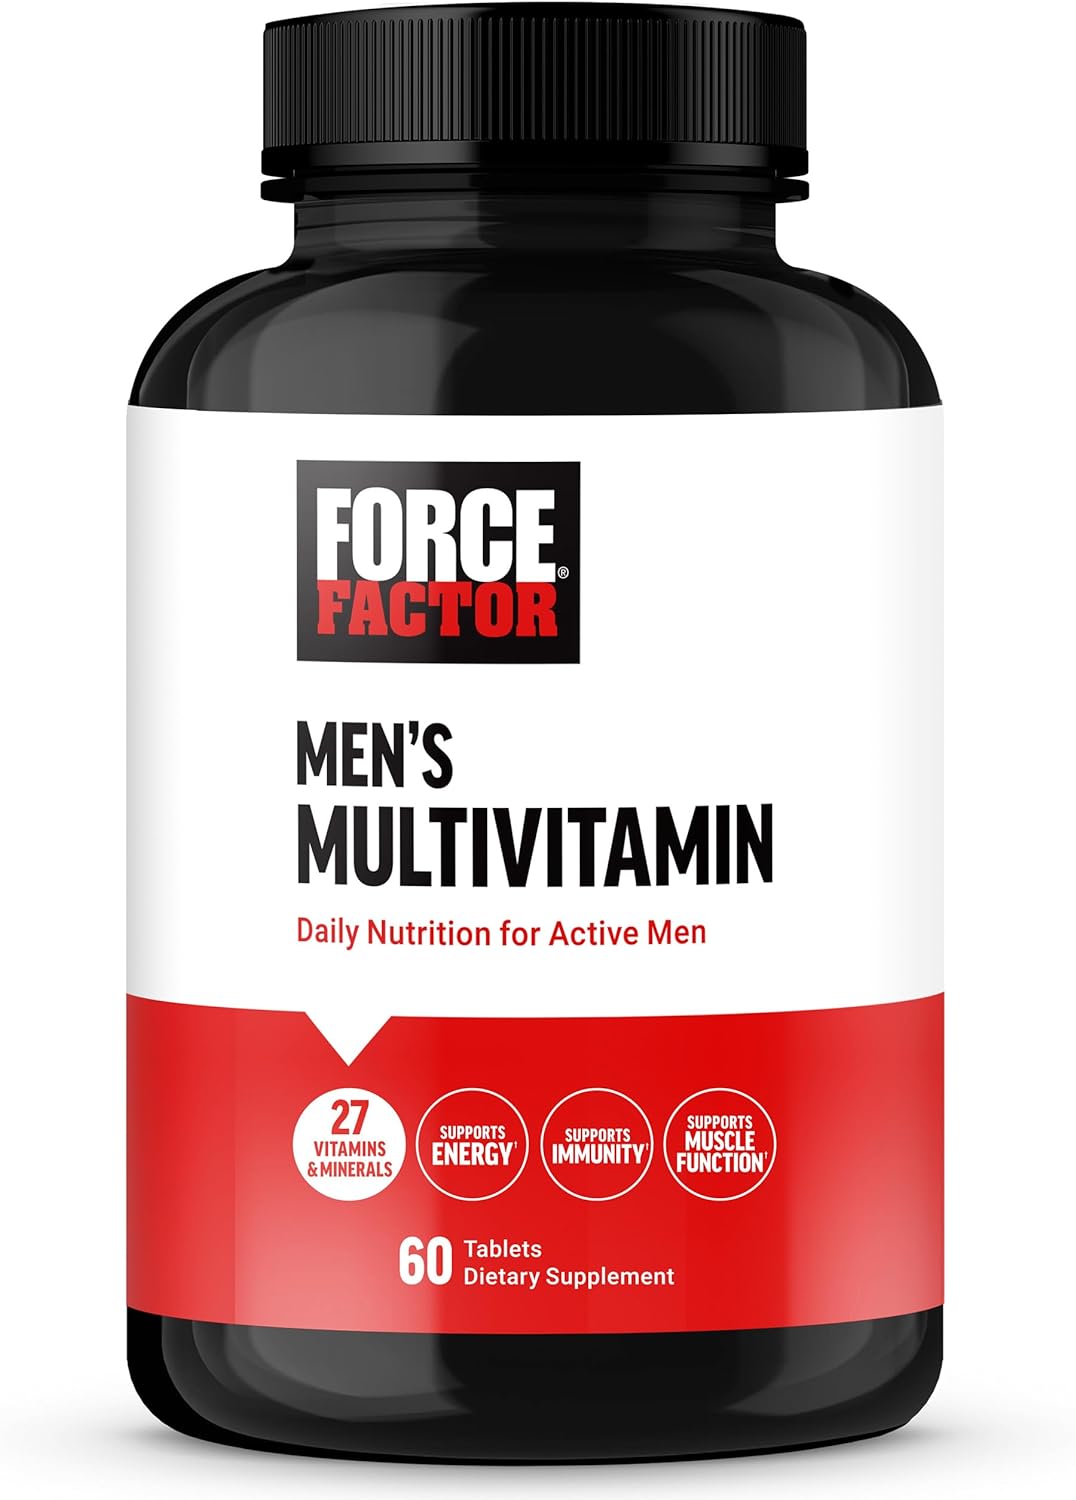 Force Factor Men?s Multivitamins, Multivitamin for Men Plus Amino Acids Supplement with 27 Vitamins and Minerals, and Phytonutrients to Support Energy, and Immunity, 60 Tablets